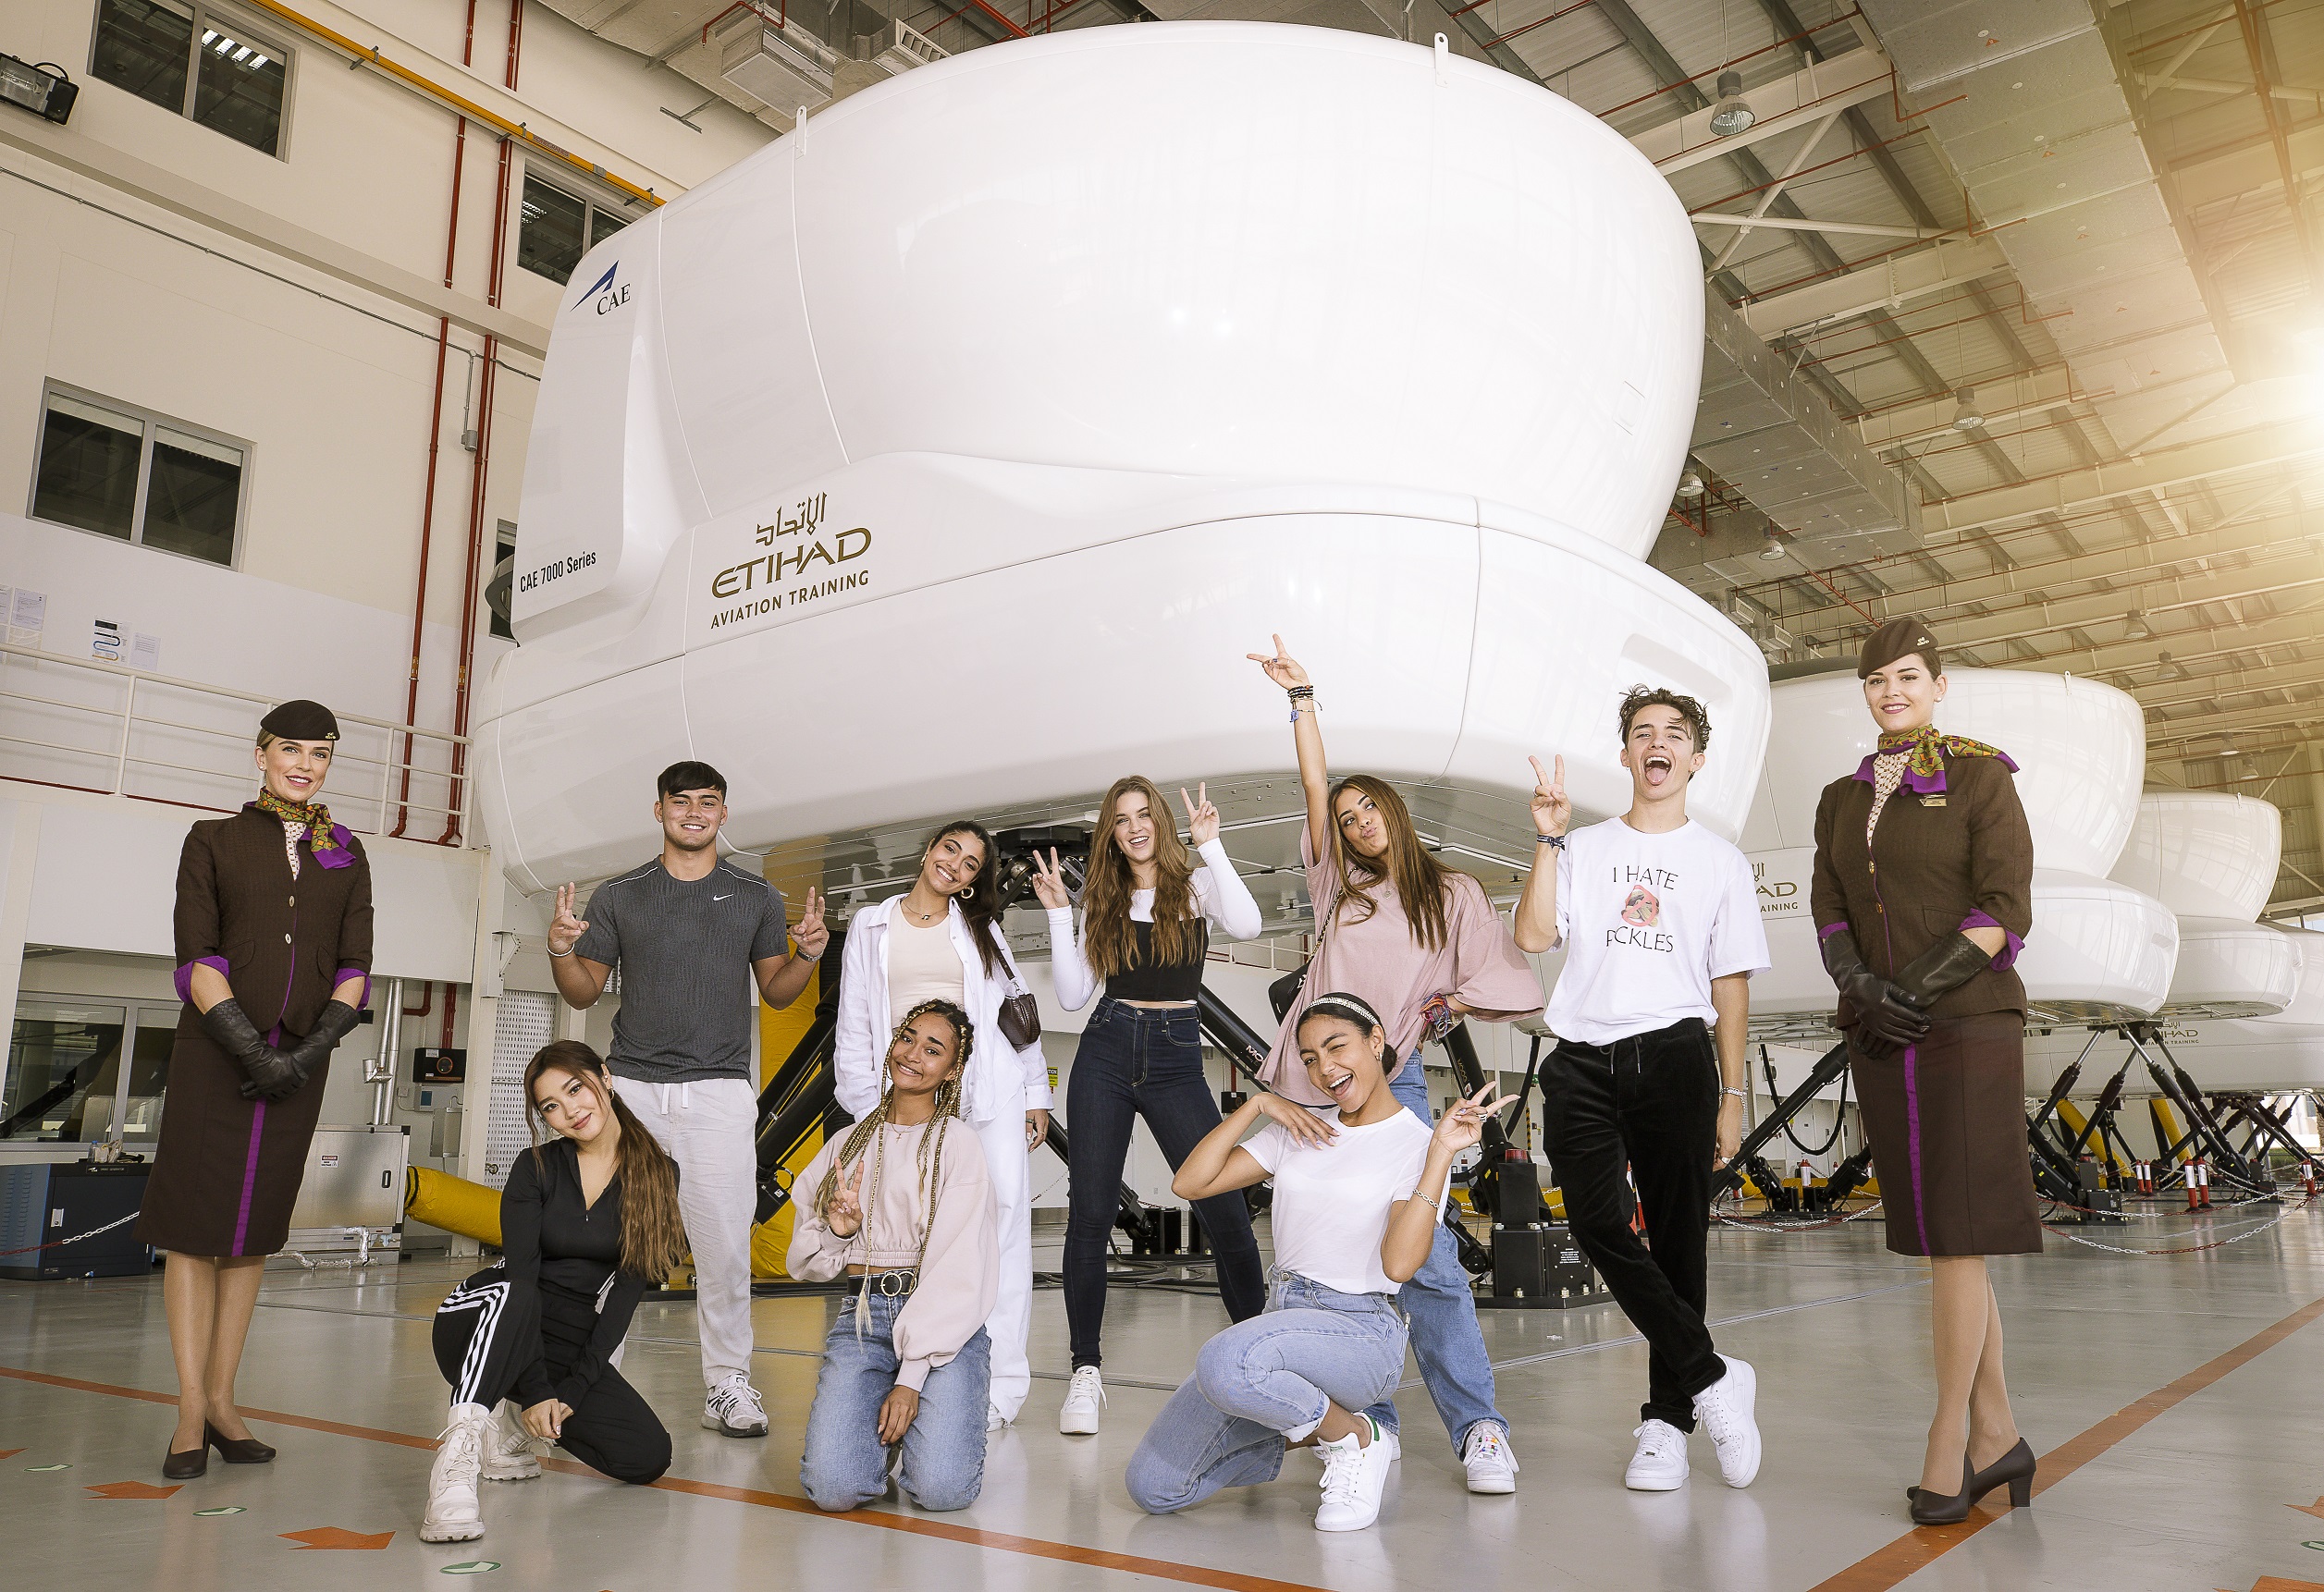 Global Pop Stars ‘Now United’ Make An Appearance At Etihad Airways